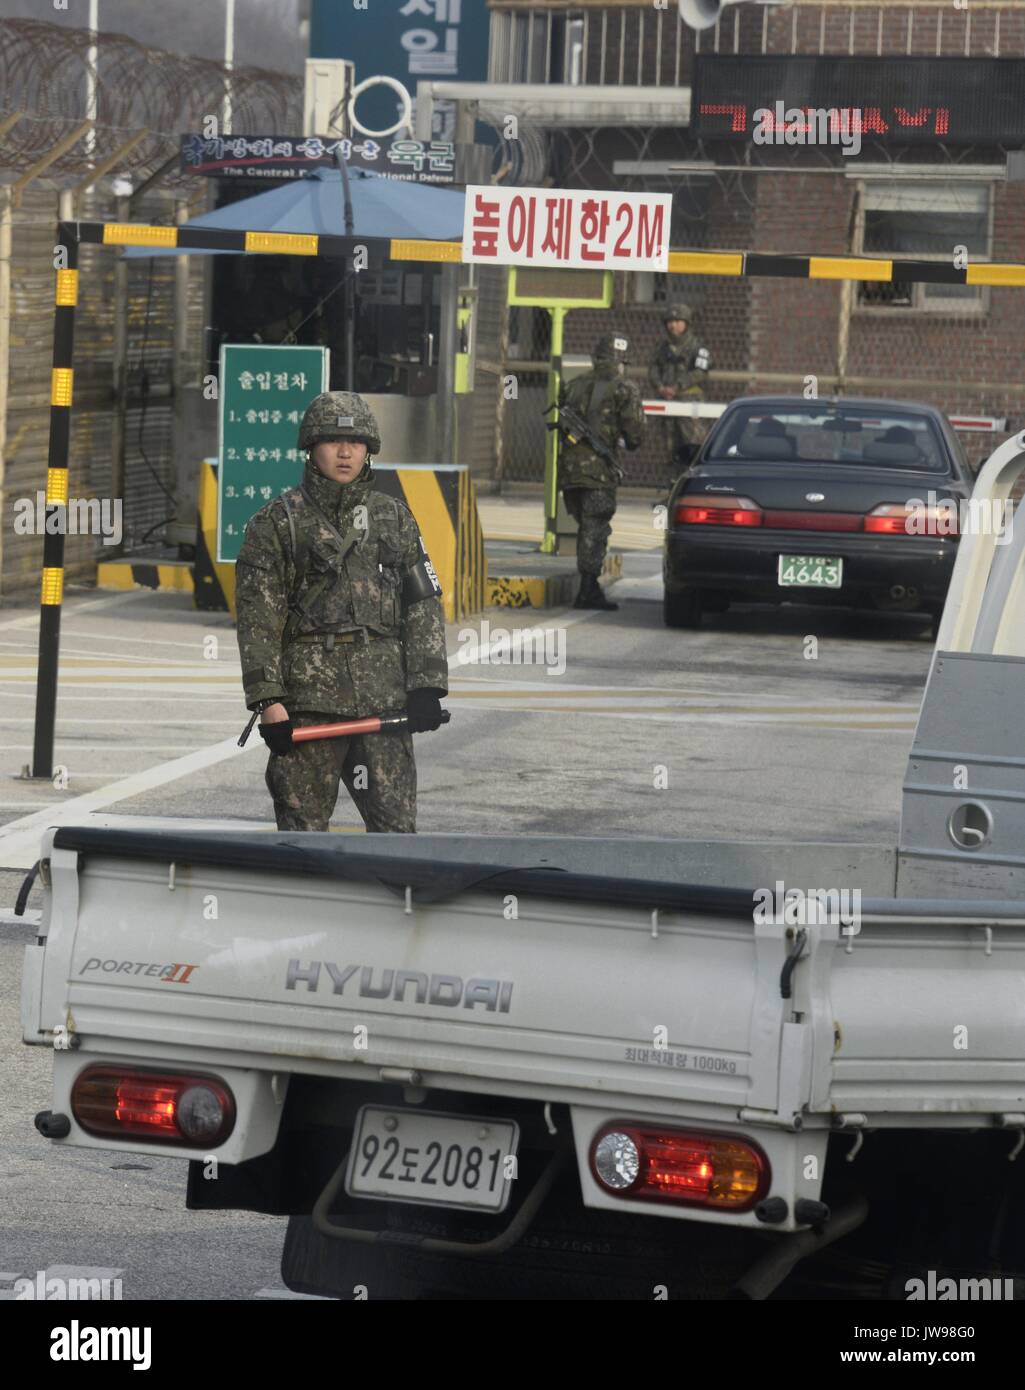 A South Korean soldier patrols cars entering the DMZ along the fenced border between South and North Korea, some 80 km north of Seoul, South Korea, 28 March 2013. South and North Korea are technically still at war after the 1950 to 1953 Korean war ended in an armistice and the Korean peninsular remains divided since then. A 250 km long and some four km wide demilitarized Zone (DMZ) runs across the Korean peninsular and is regarded as the most militarized border in the world. | usage worldwide Stock Photo